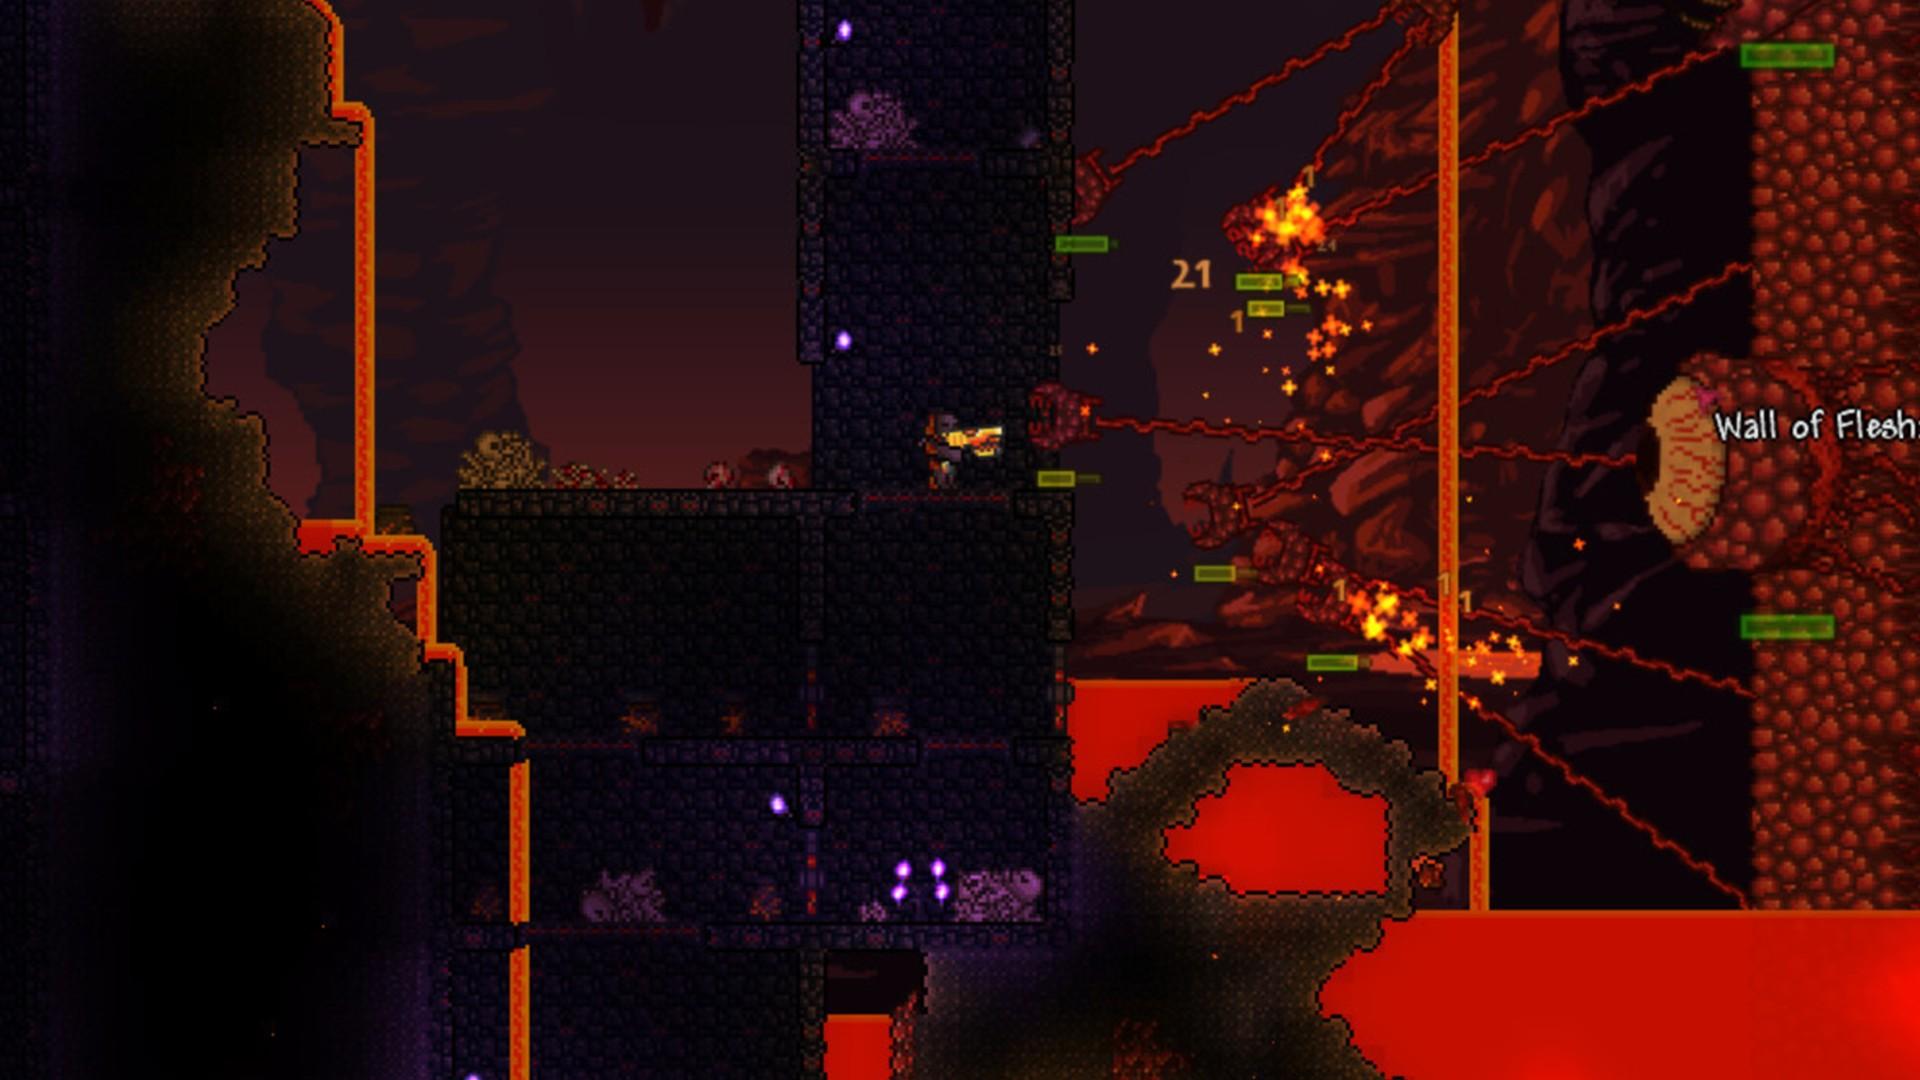 new to terraria (not just the mod I mean the game) just beat mech